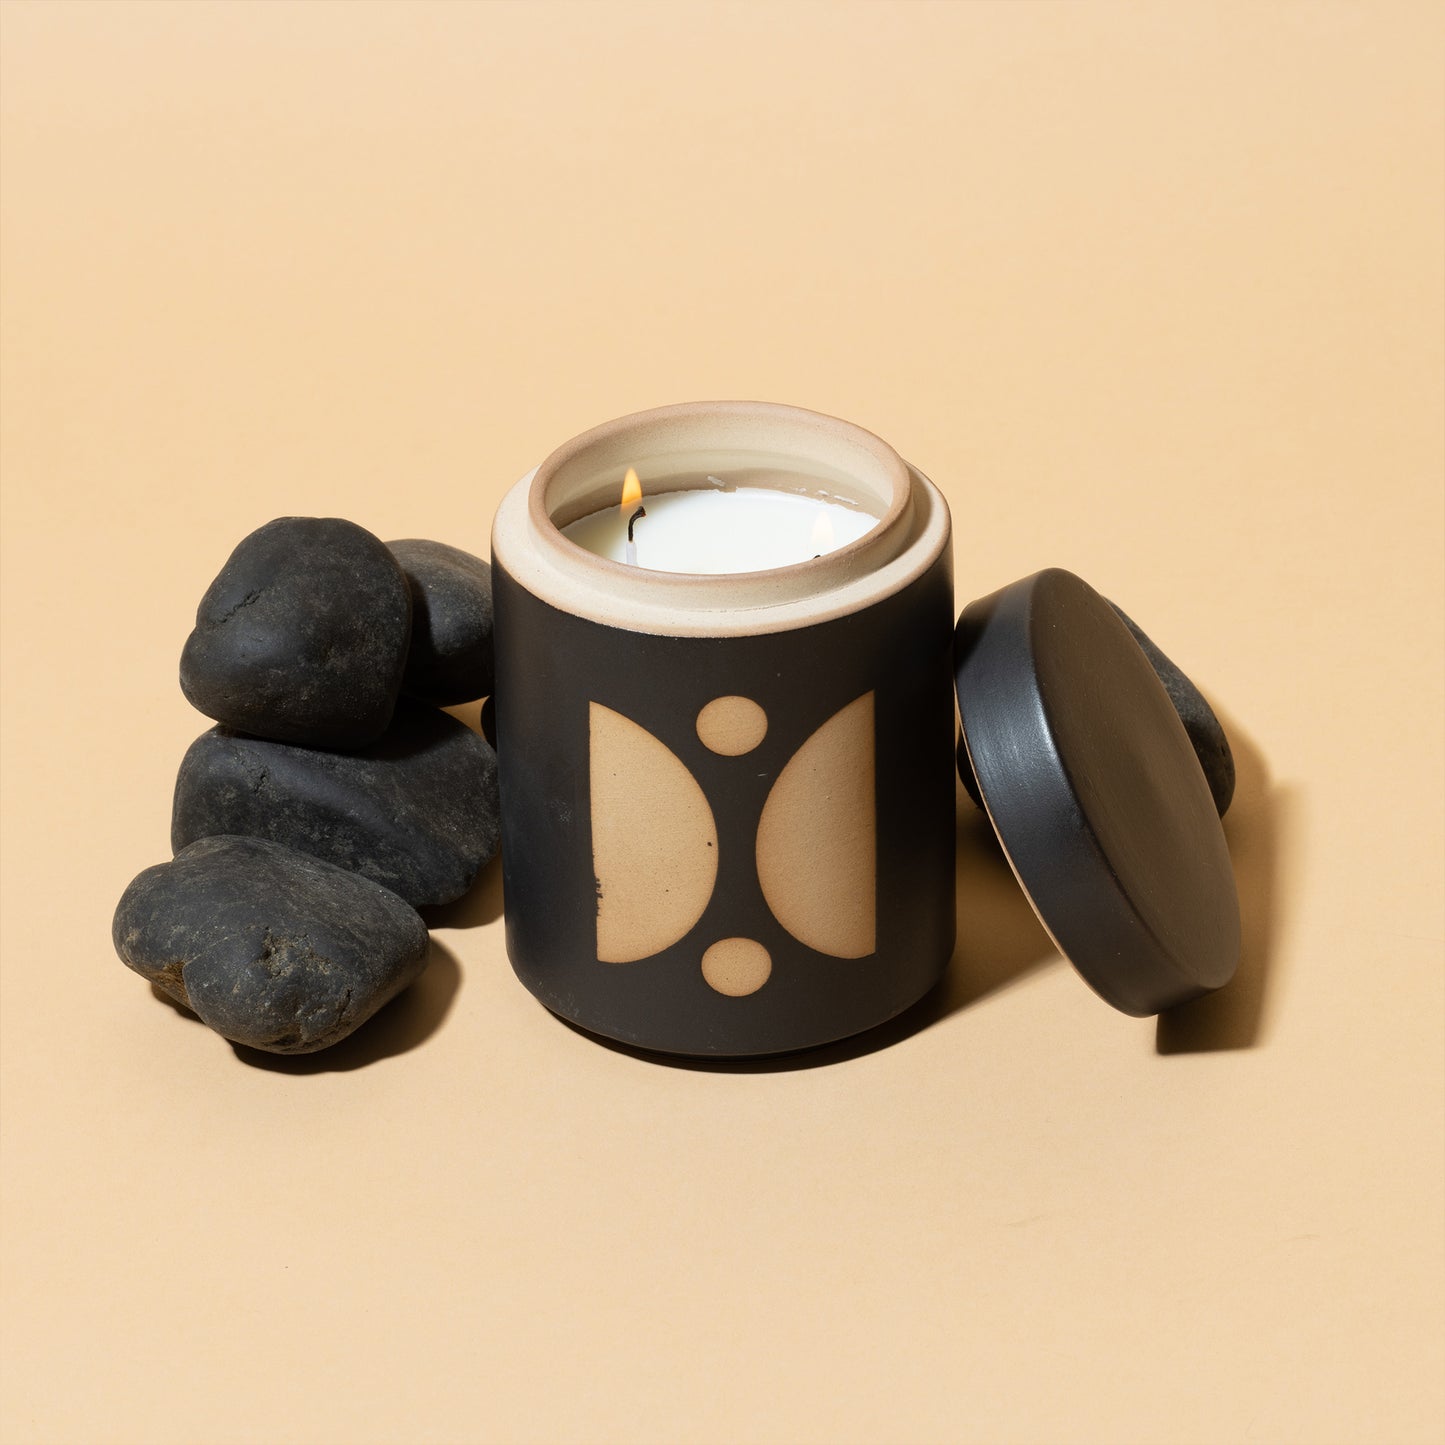 12 oz black cylindrical ceramic vessel with ceramic lid; white wax and two cotton wicks; reflected beige semi-circle design on the side